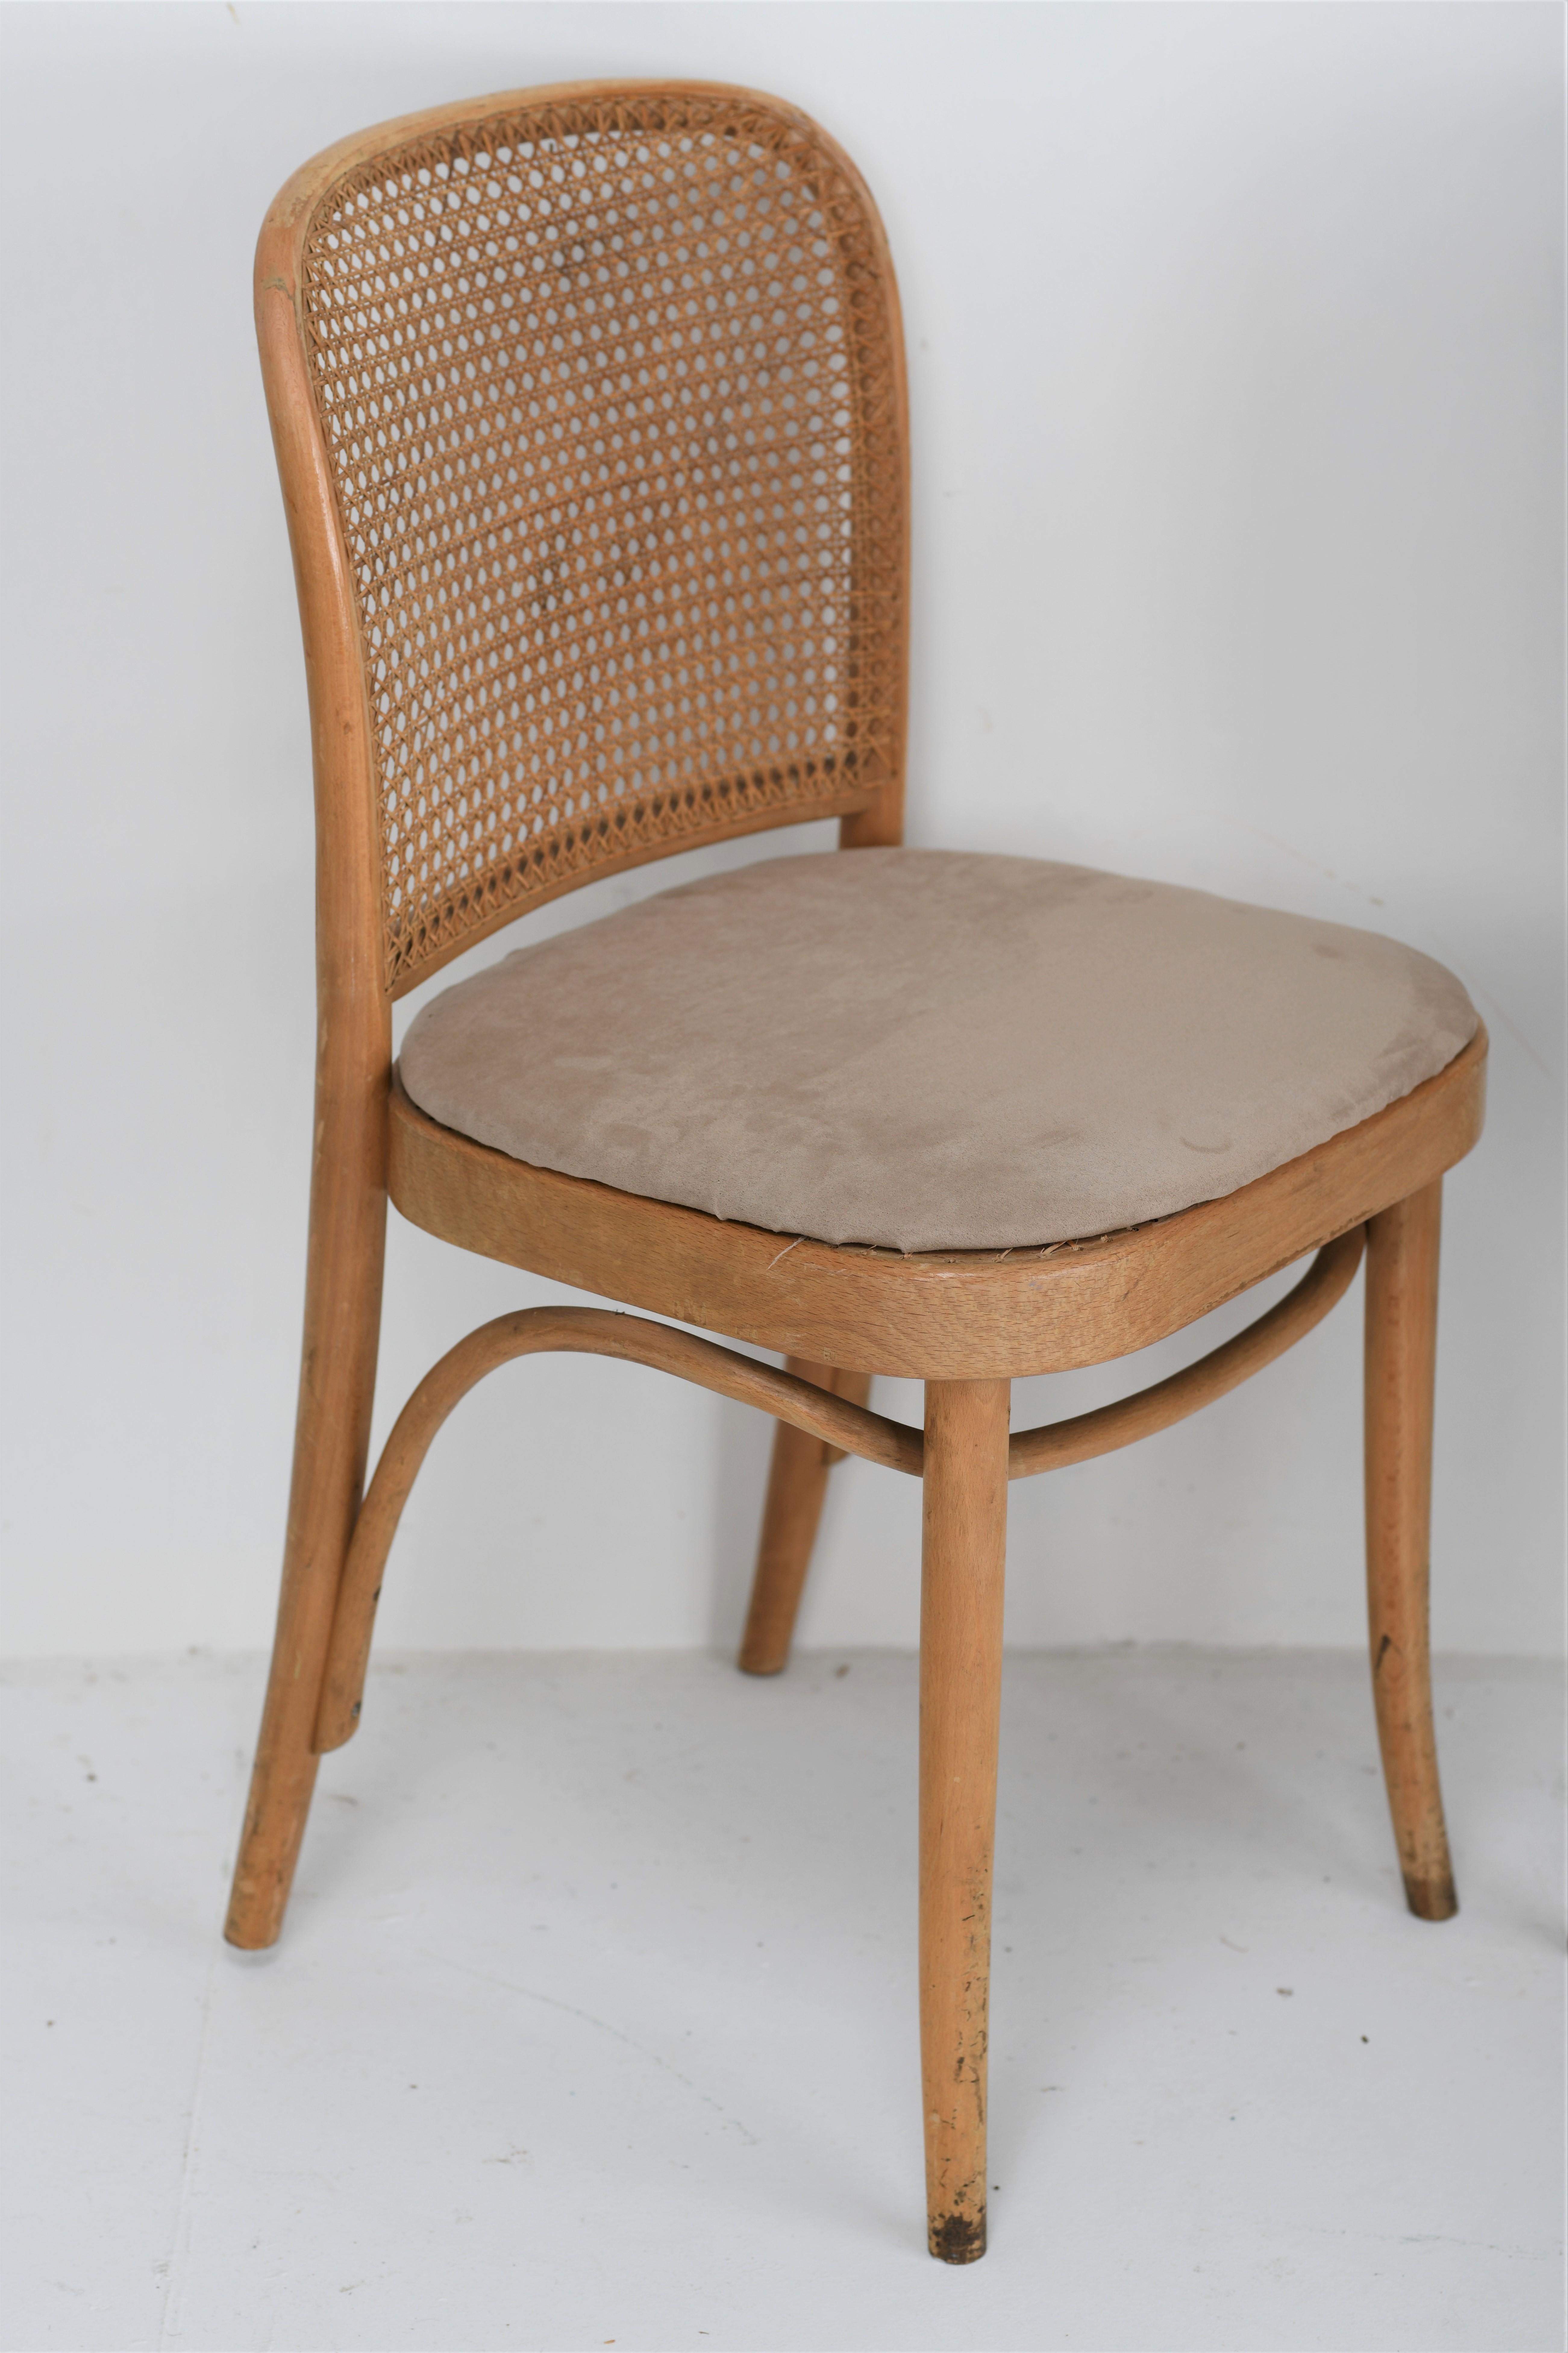 1950s vintage hand-caned “Prague chairs” designed by Josef Hoffmann for Thonet. Bentwood frame and caned backs and seats frames solid cane intact good patina to the frame.